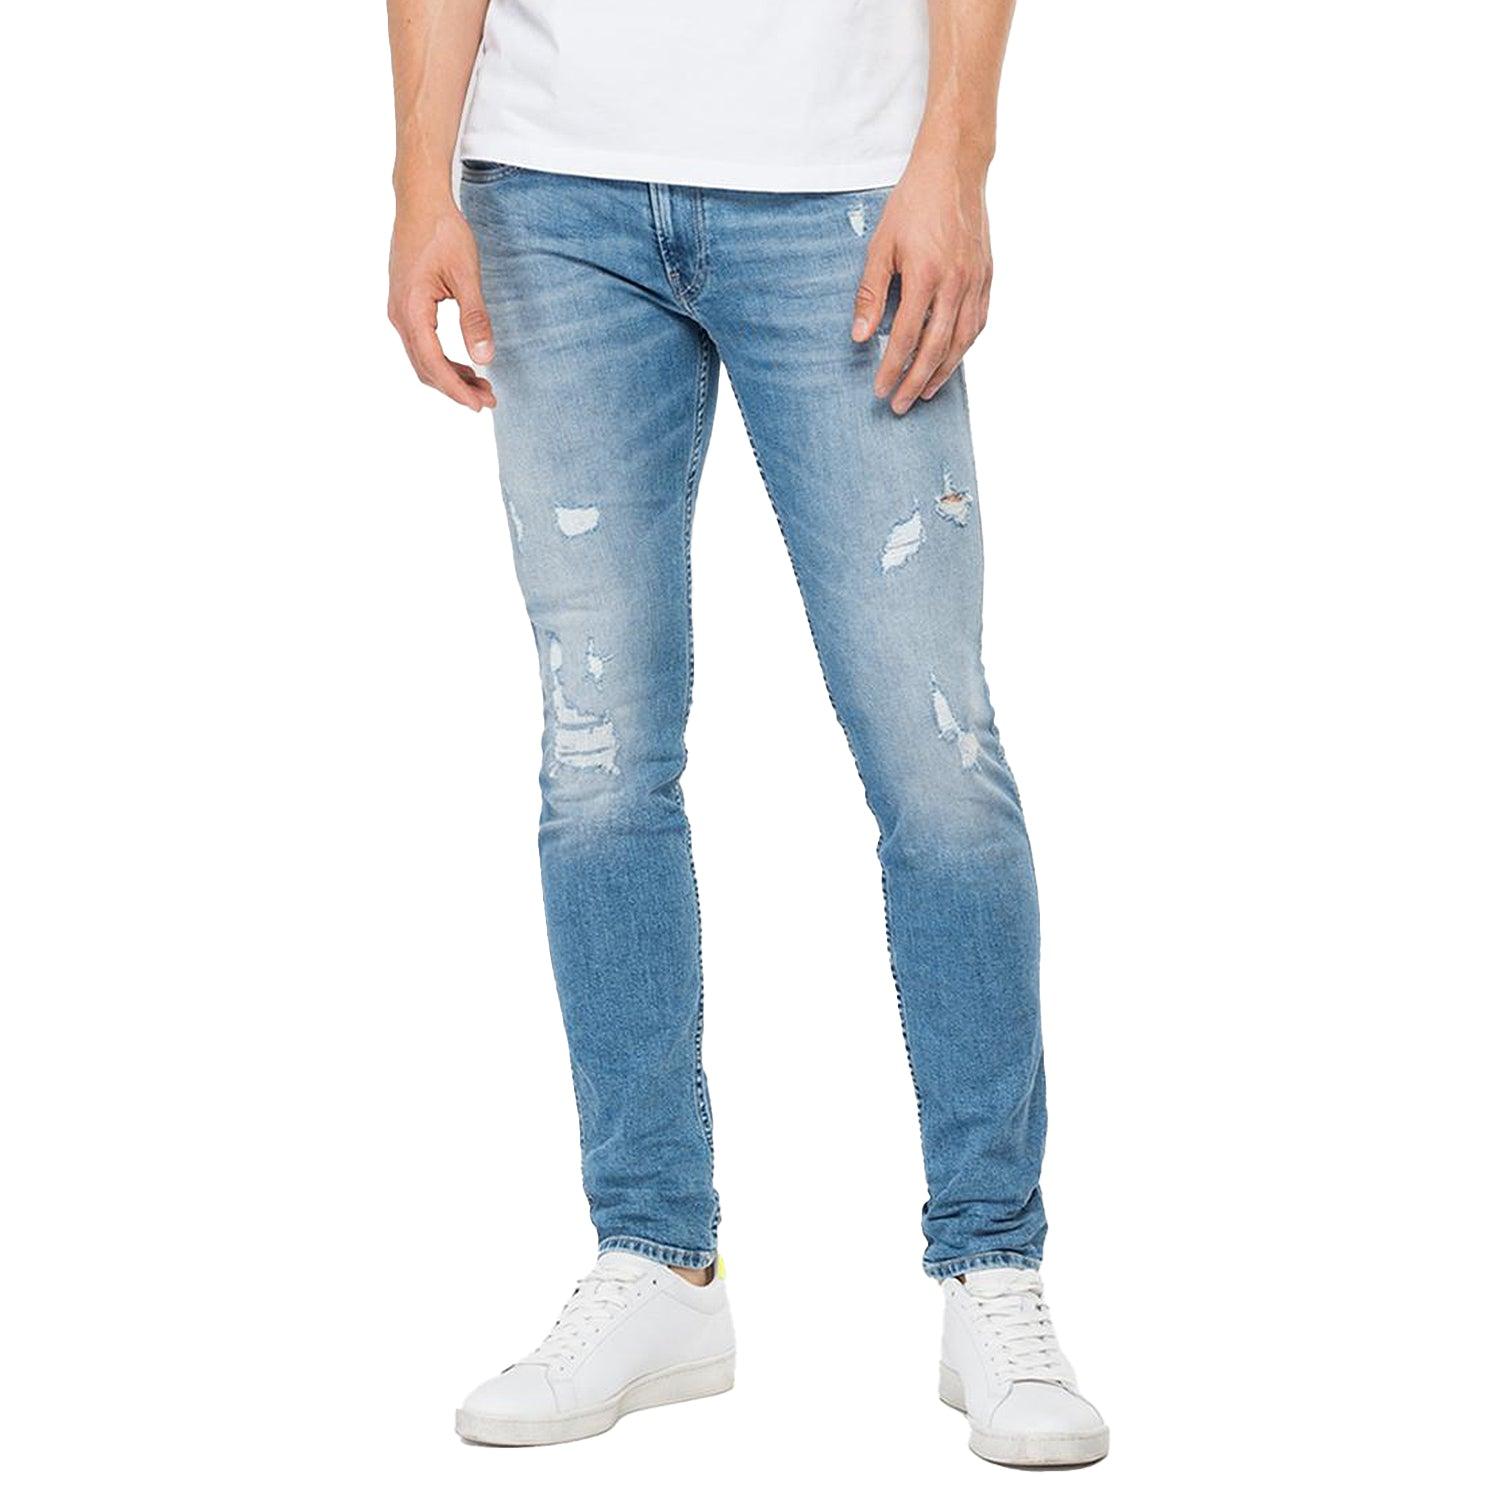 Replay Denim Anbass 573 Bio Slim Fit Jeans in Blue for Men - Lyst